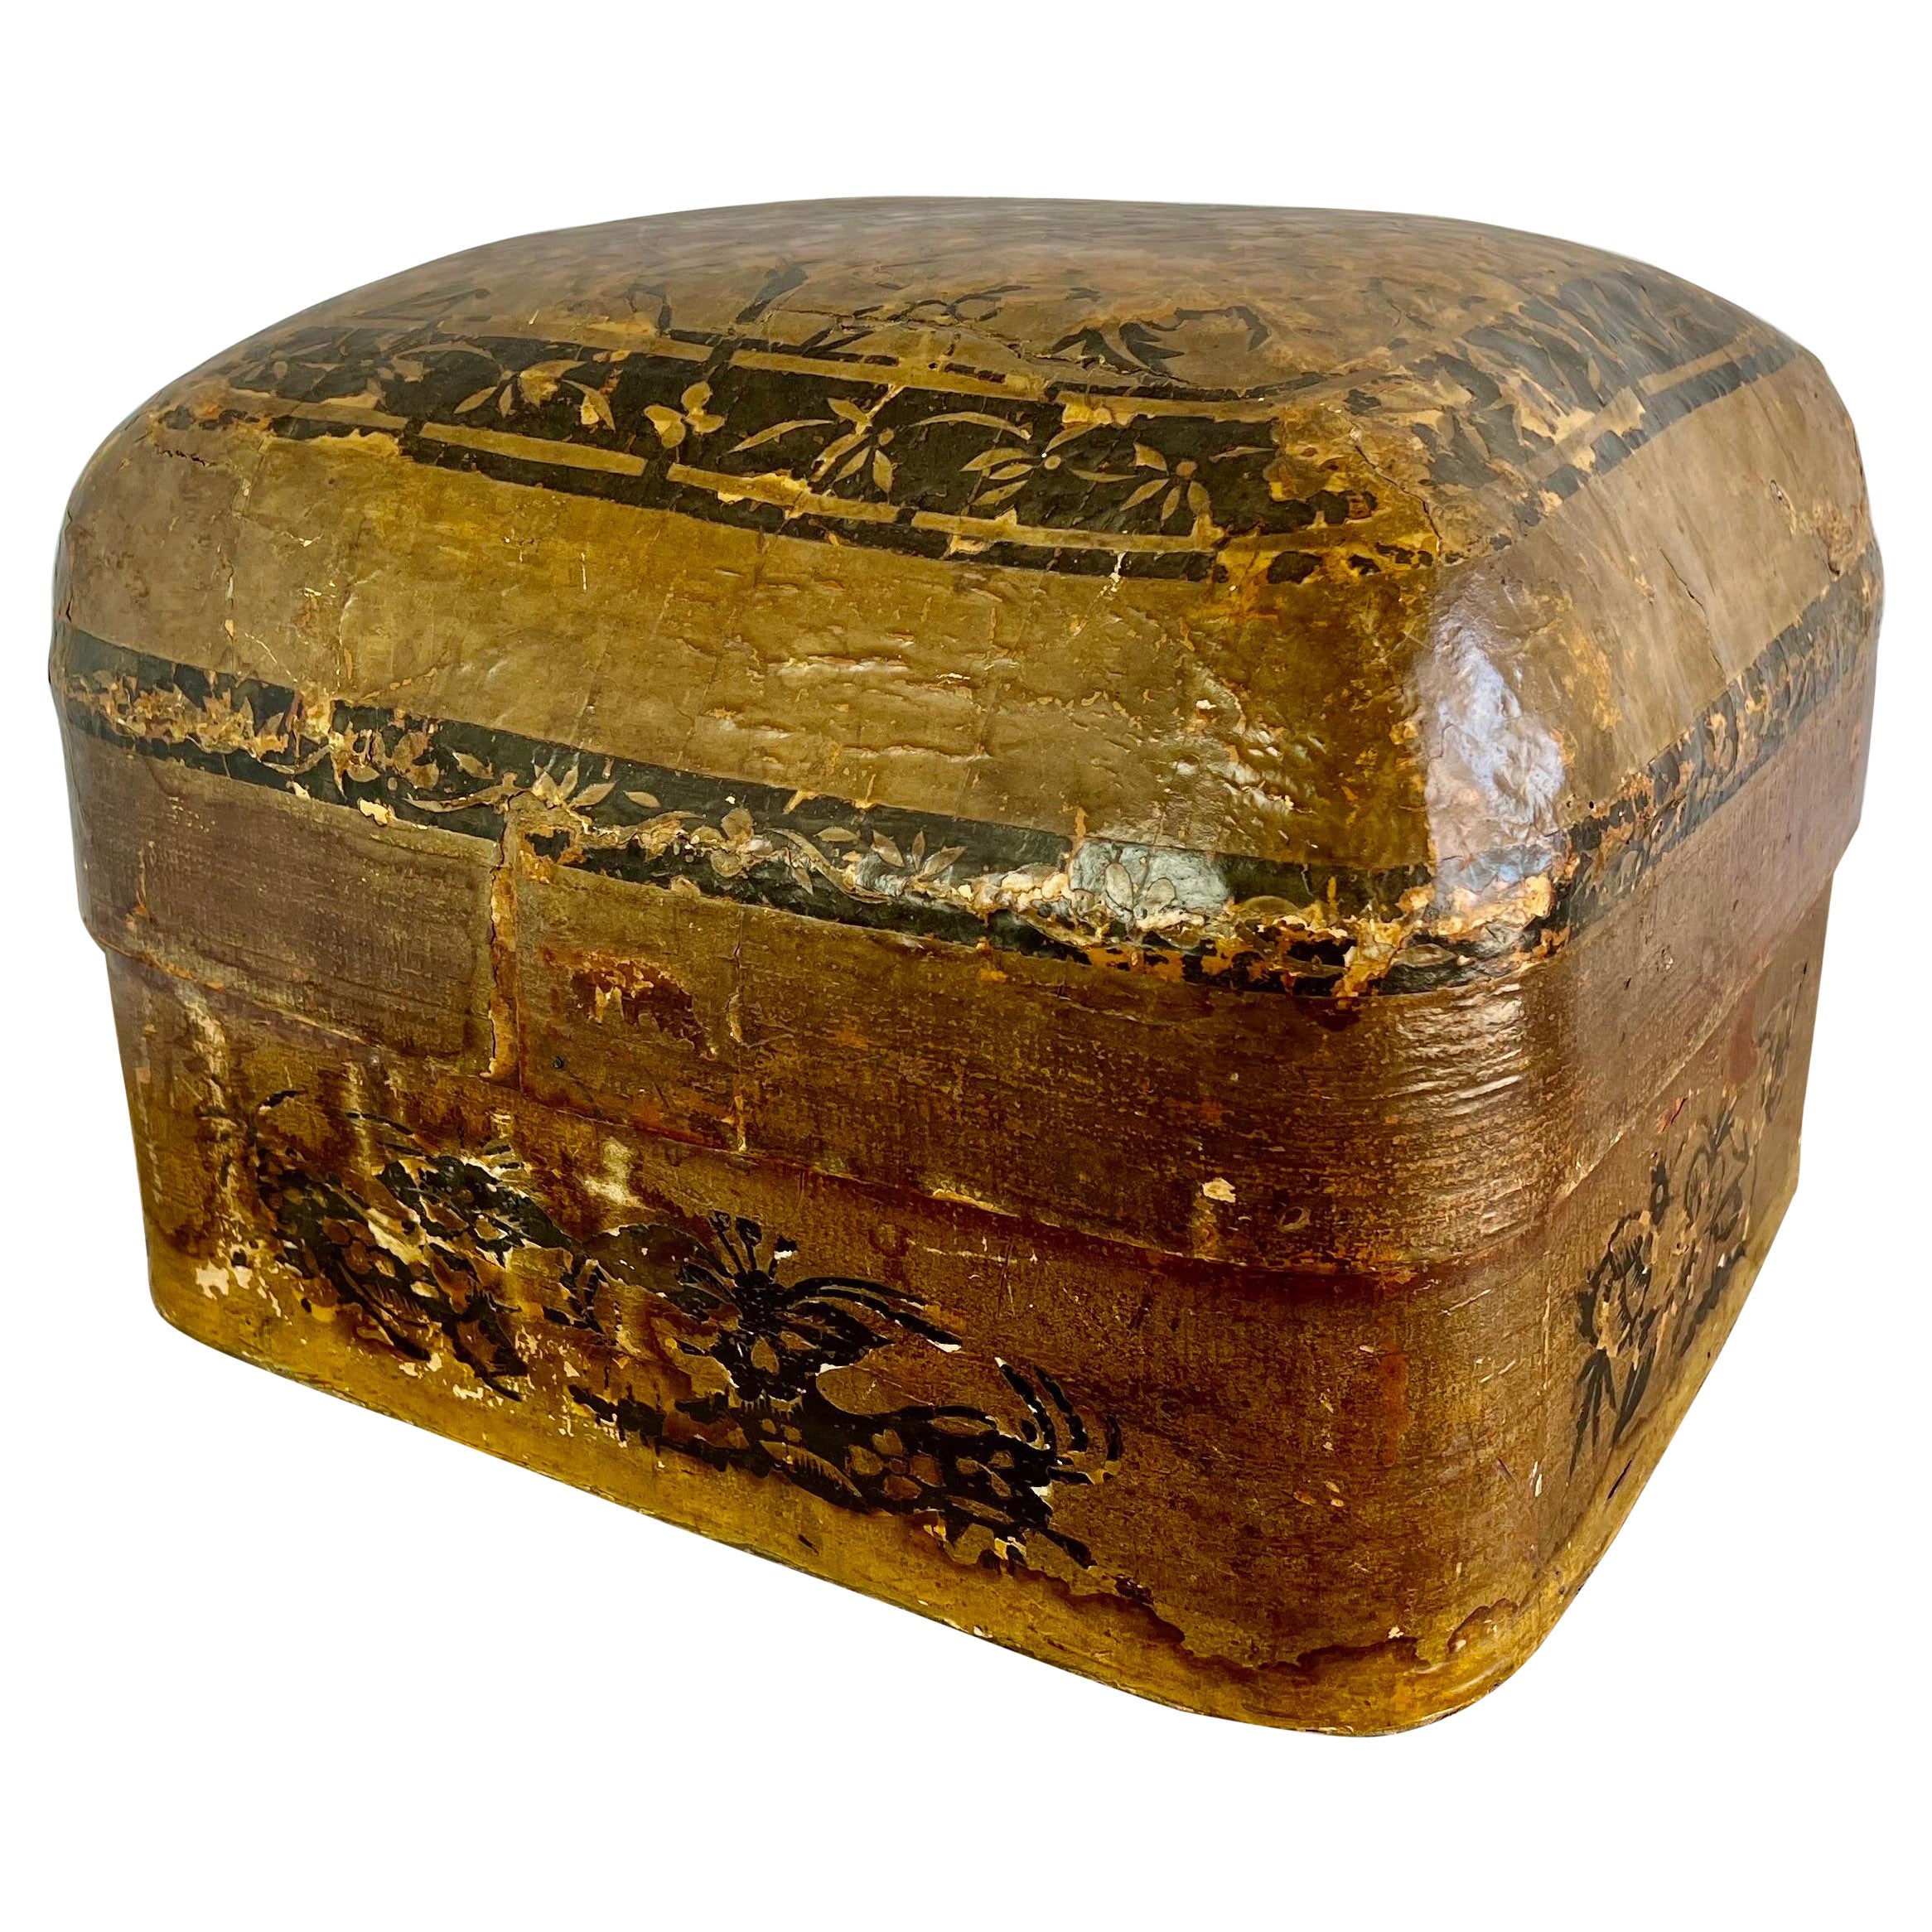 19th century lidded box made from paper-machiere.